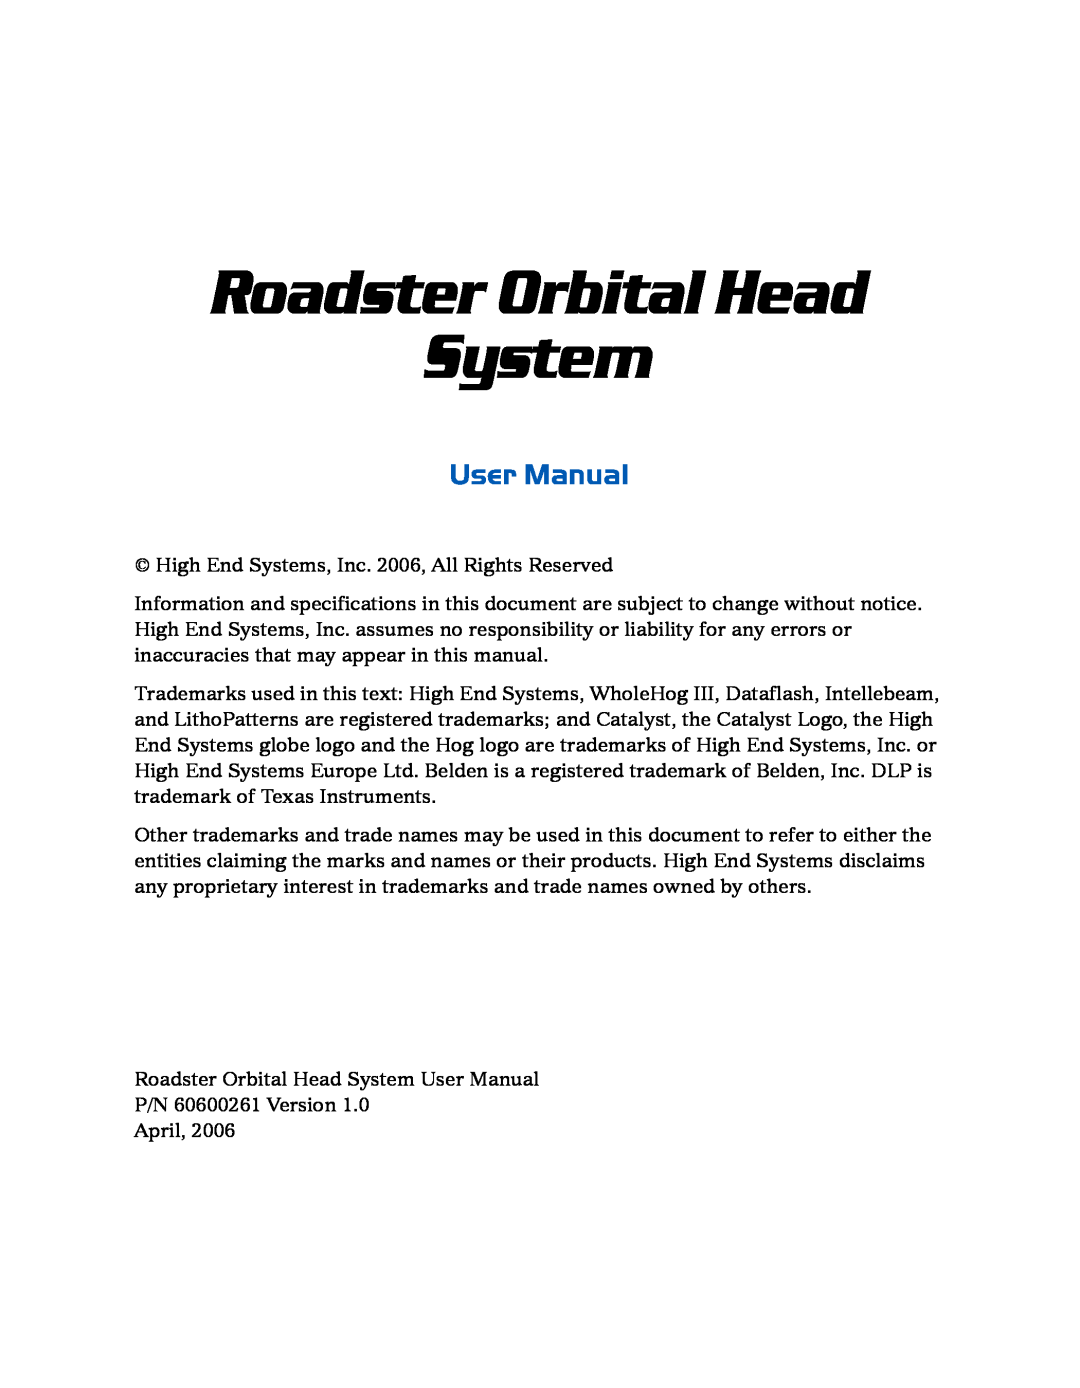 High End Systems Roadster Orbital Head System user manual User Manual 